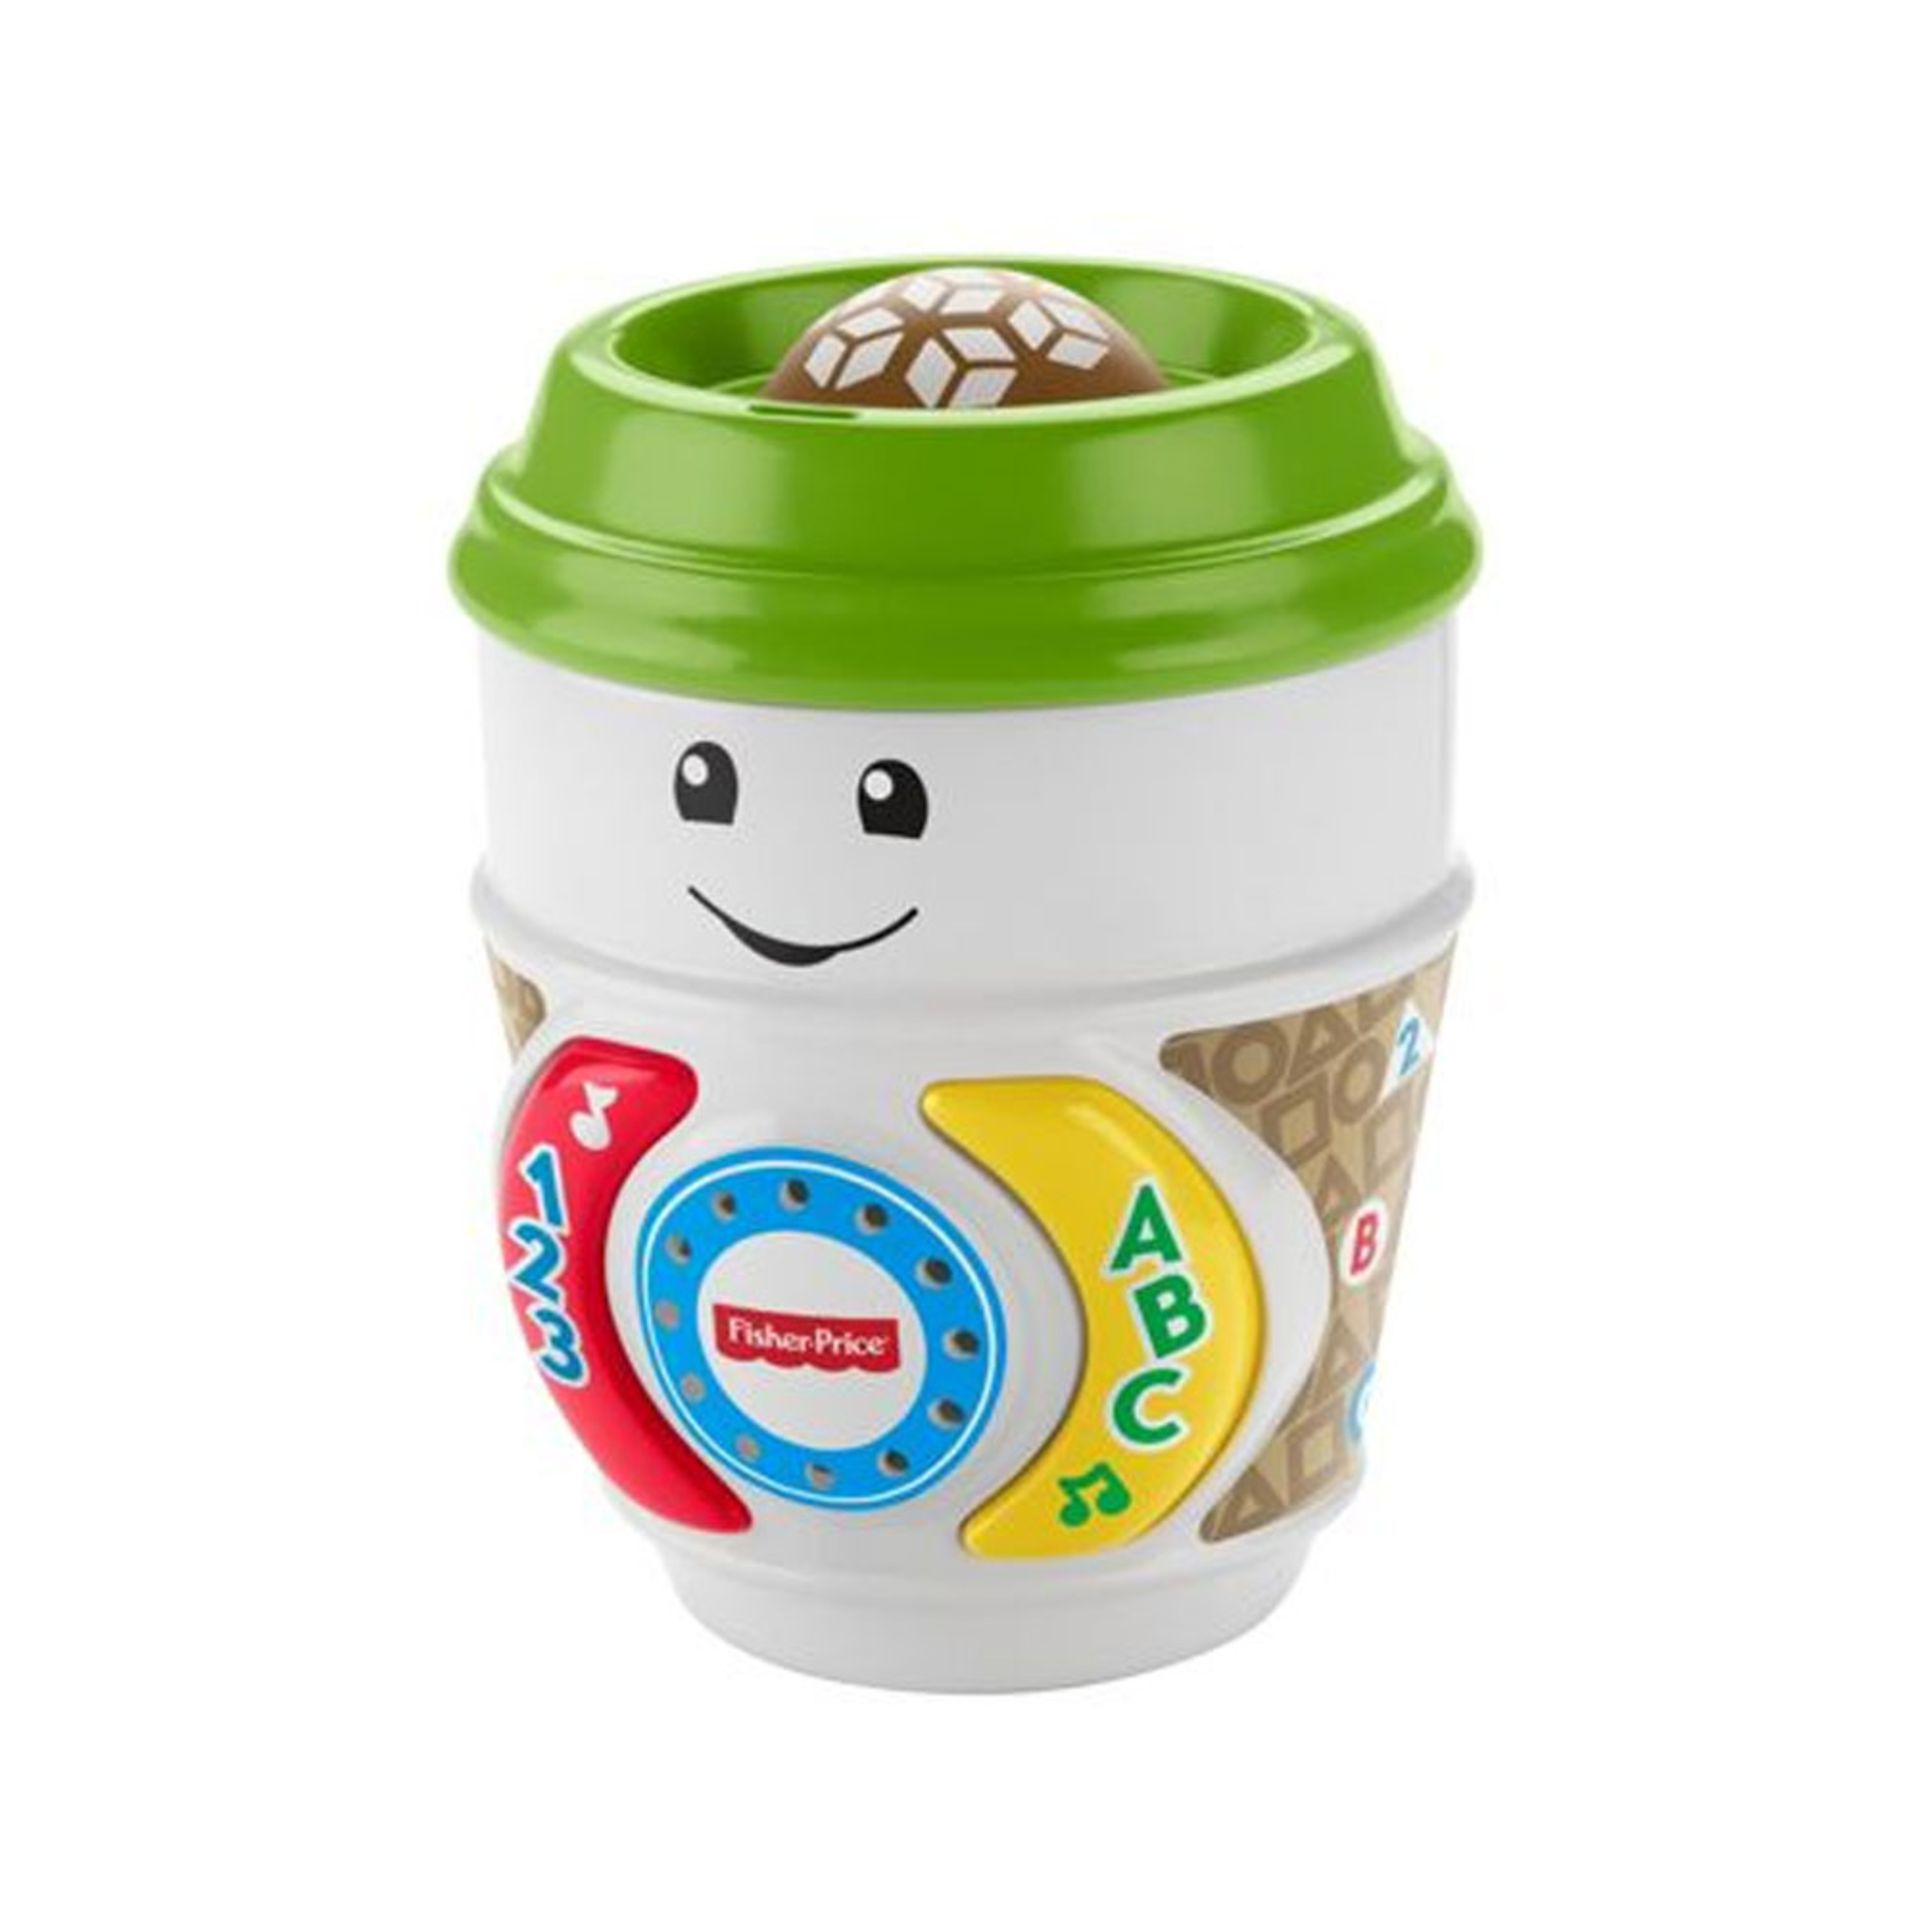 New Fisher Price Laugh & Learn On-the-Glow Coffee Cup - RRP £12.99. - Image 2 of 2